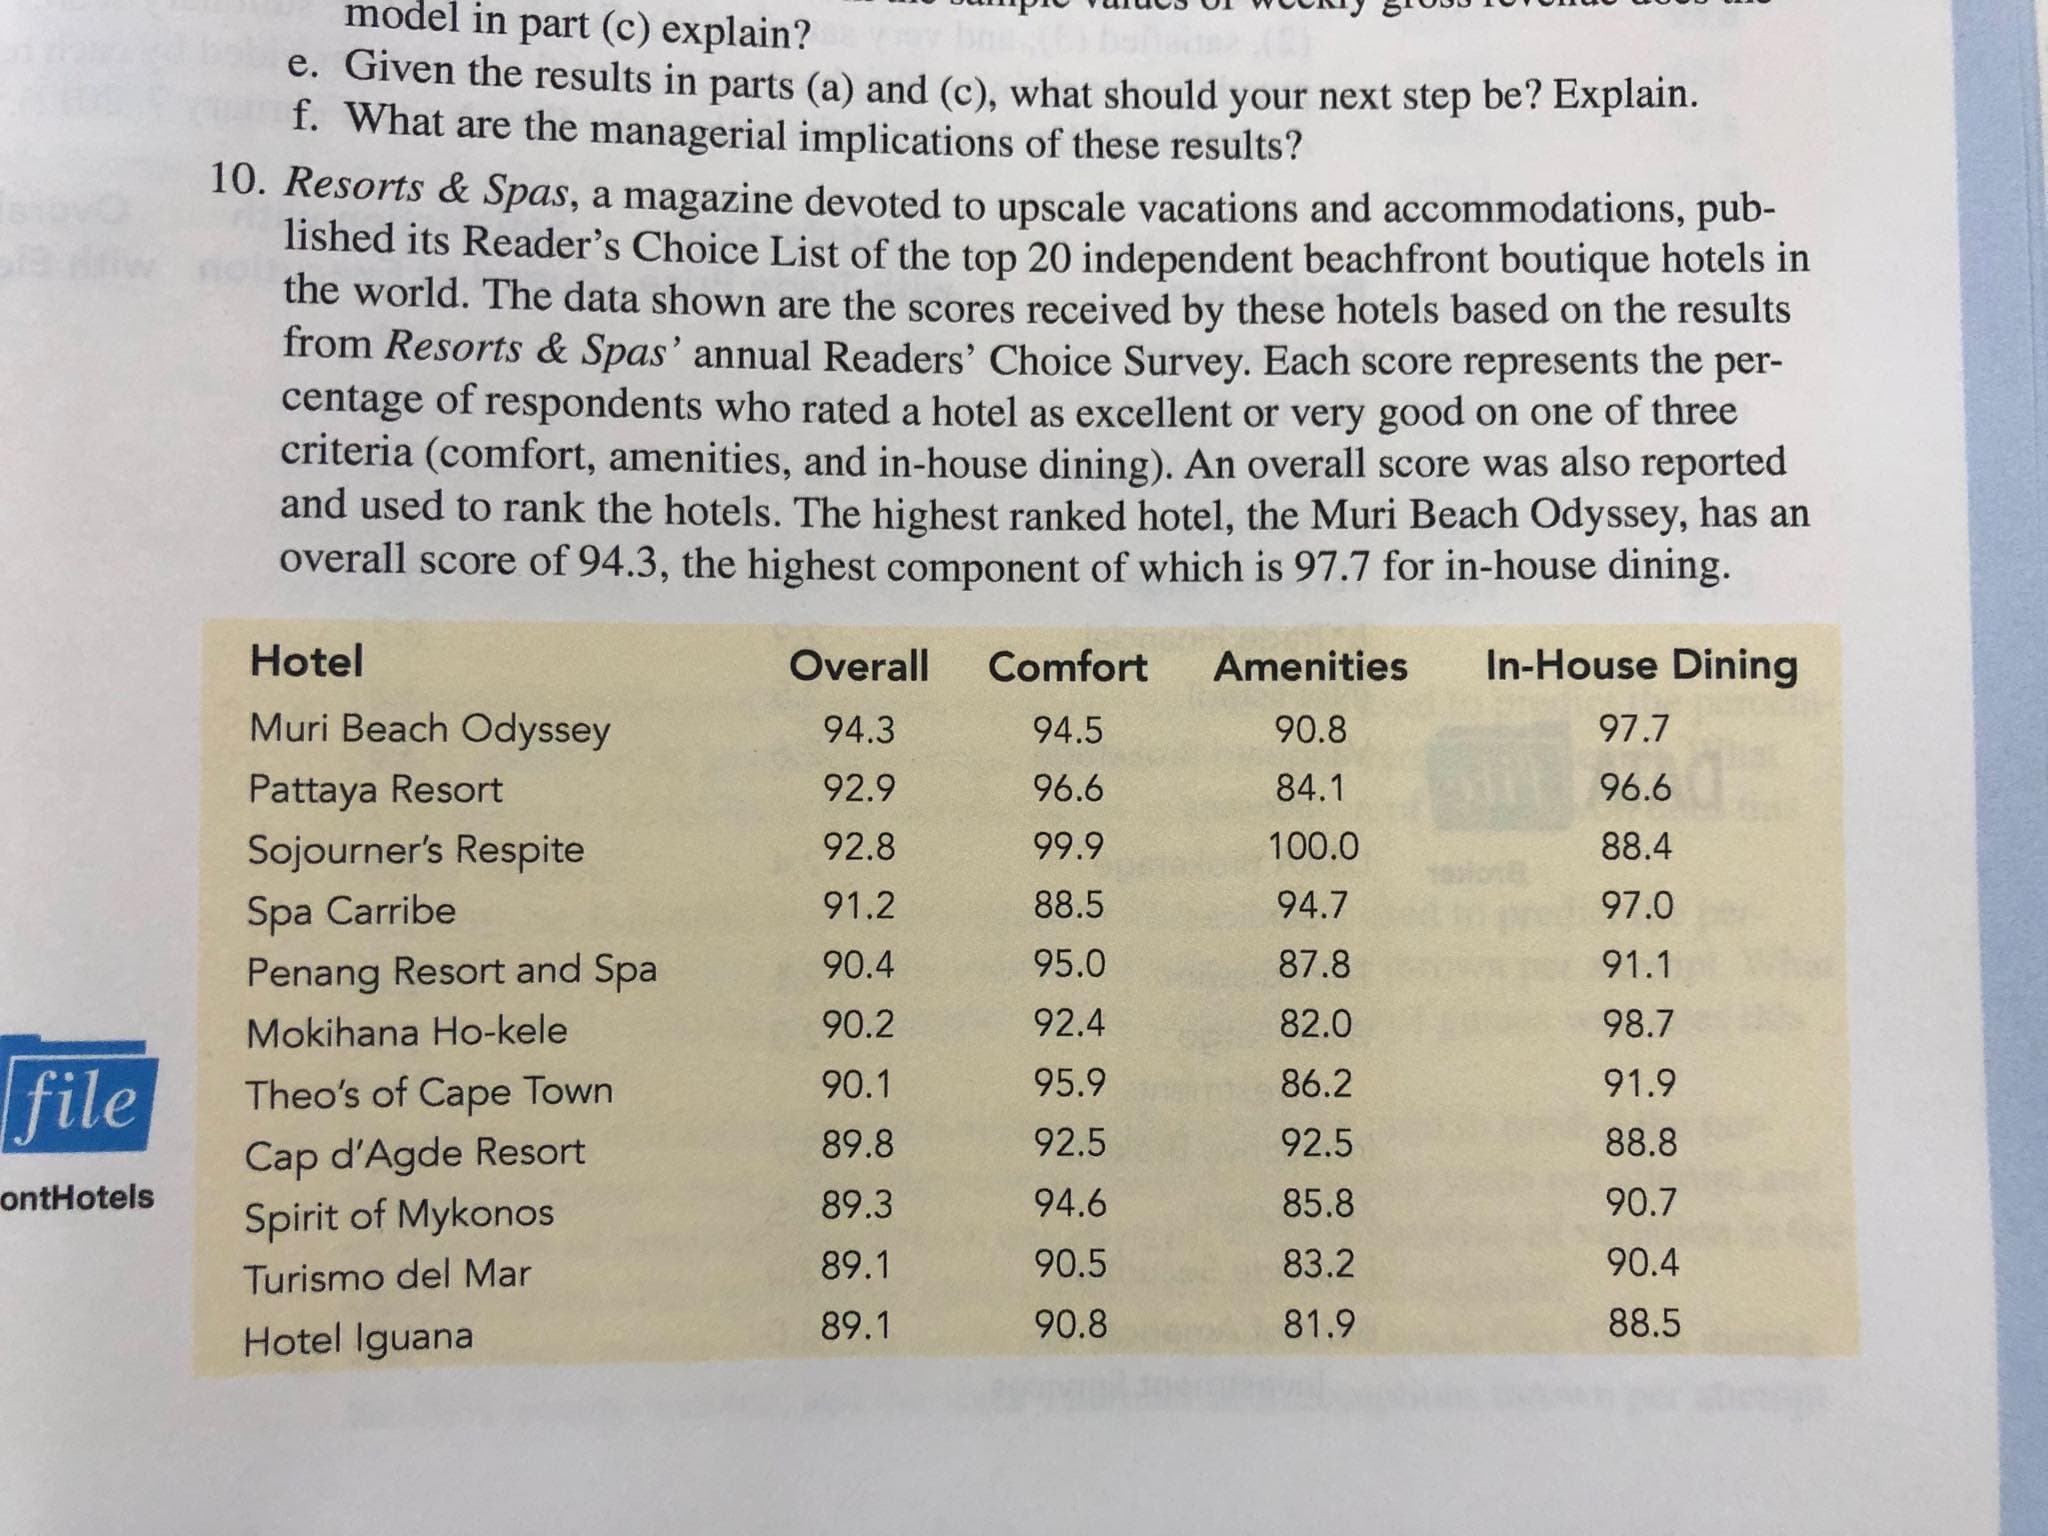 Resorts & Spas, a magazine devoted to upscale vacations and accommodations, pub-
lished its Reader's Choice List of the top 20 independent beachfront boutique hotels in
the world. The data shown are the scores received by these hotels based on the results
from Resorts & Spas' annual Readers' Choice Survey. Each score represents the per-
centage of respondents who rated a hotel as excellent or very good on one of three
criteria (comfort, amenities, and in-house dining). An overall score was also reported
and used to rank the hotels. The highest ranked hotel, the Muri Beach Odyssey, has an
overall score of 94.3, the highest component of which is 97.7 for in-house dining.
